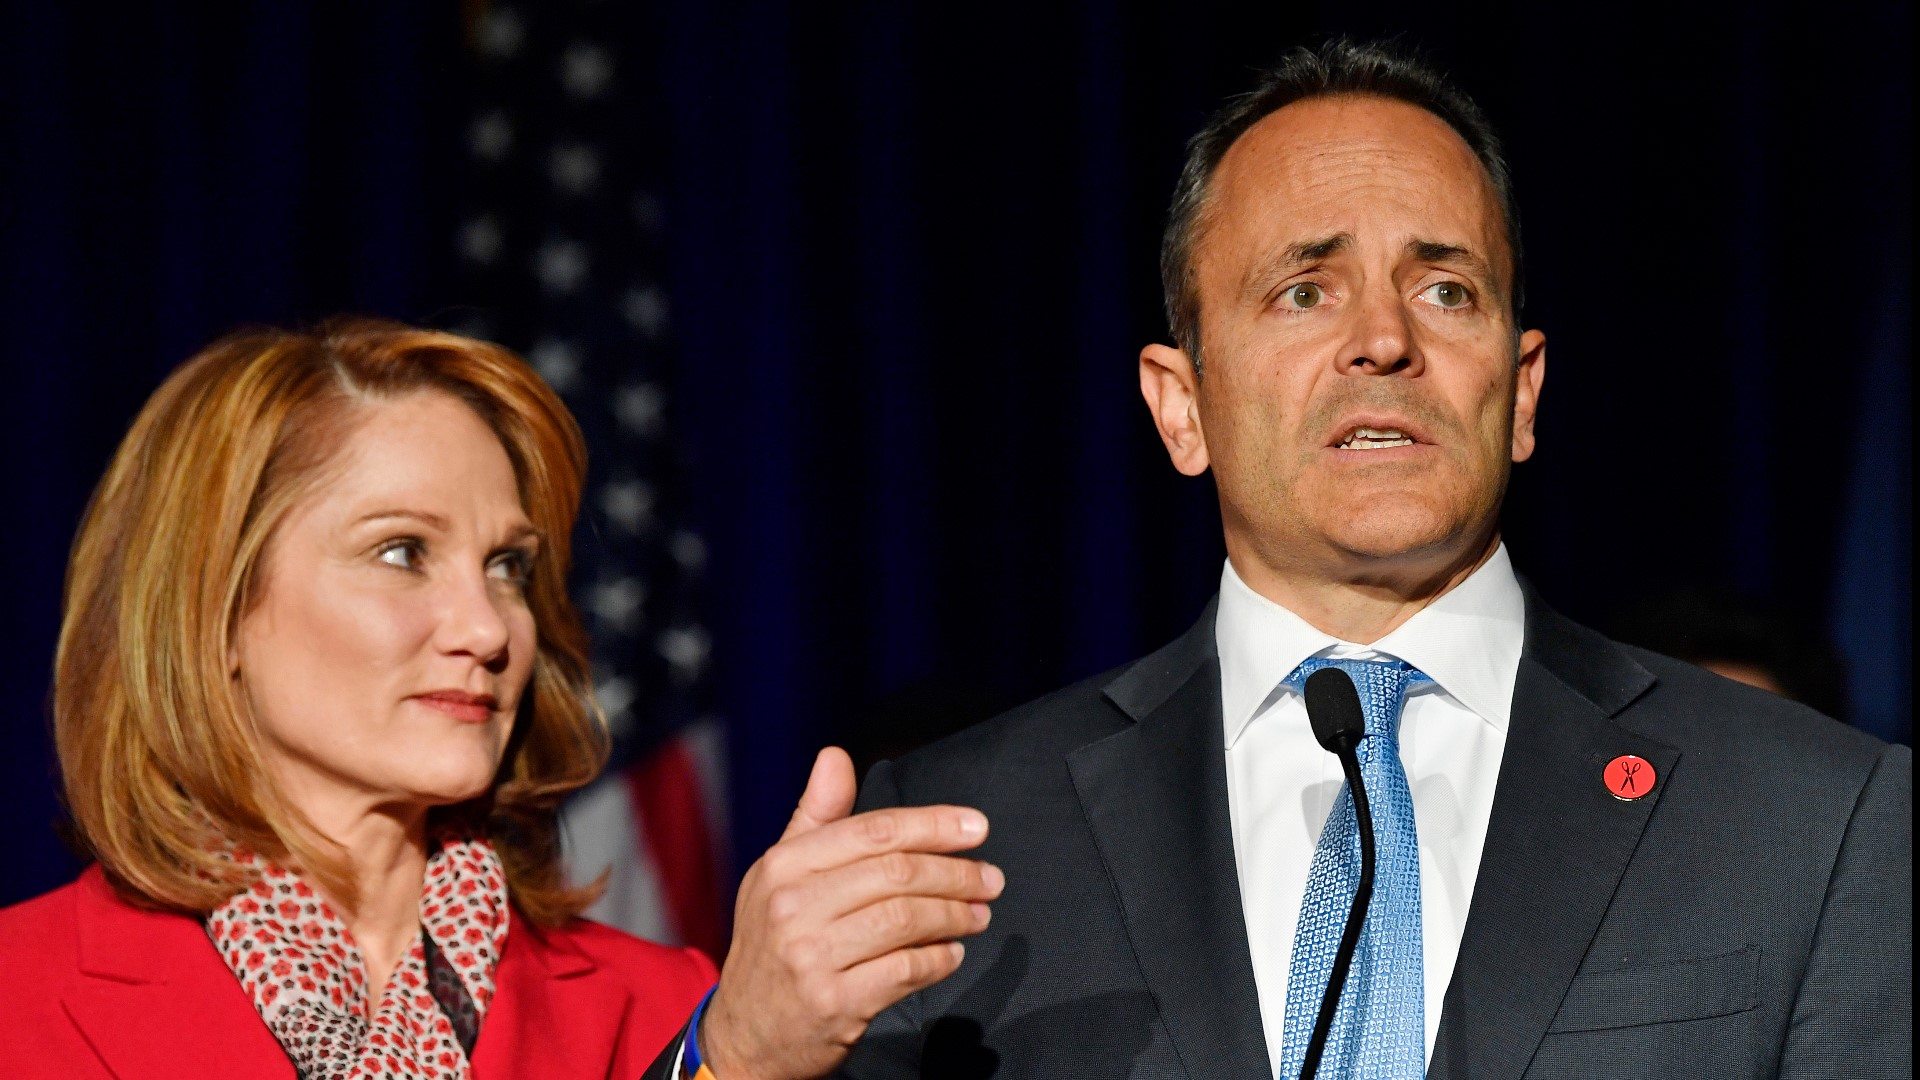 Incumbent Matt Bevin refused to concede, and there are a couple of different paths moving forward: concede, order a recanvass or request a recount.